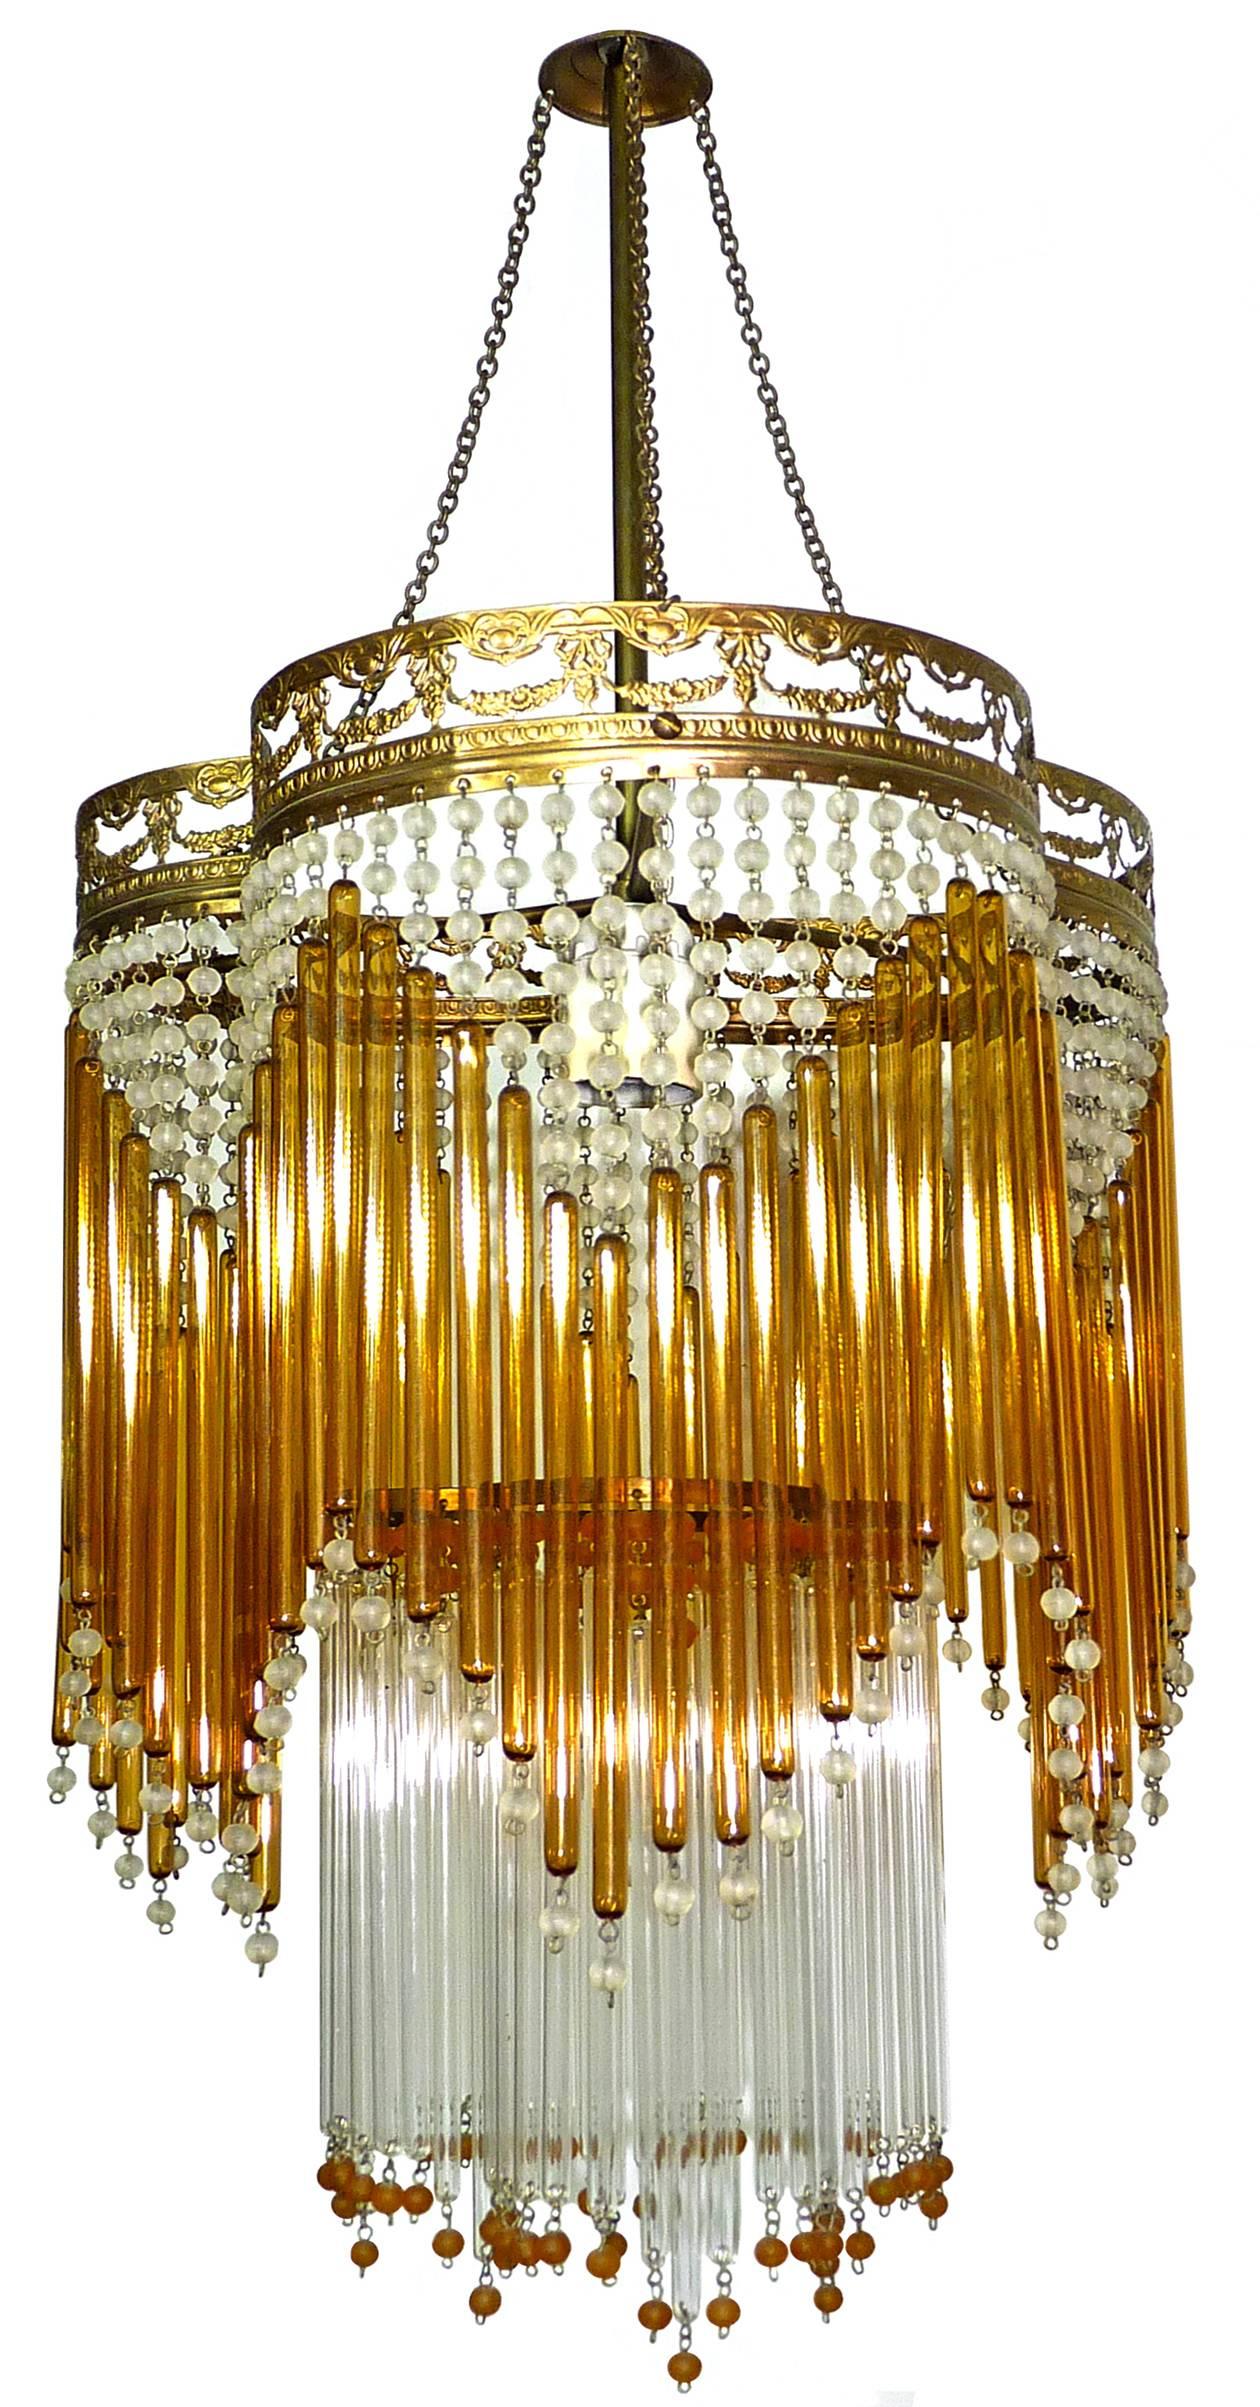 Beautiful Italian Mid-Century in clear and amber Murano beaded glass Art Deco / Art Nouveau chandelier
Measures: 
Diameter 30 cm
Height 87 cm
One light bulb E27/ good working condition/European wiring.
Age patina
Also have matching chandeliers